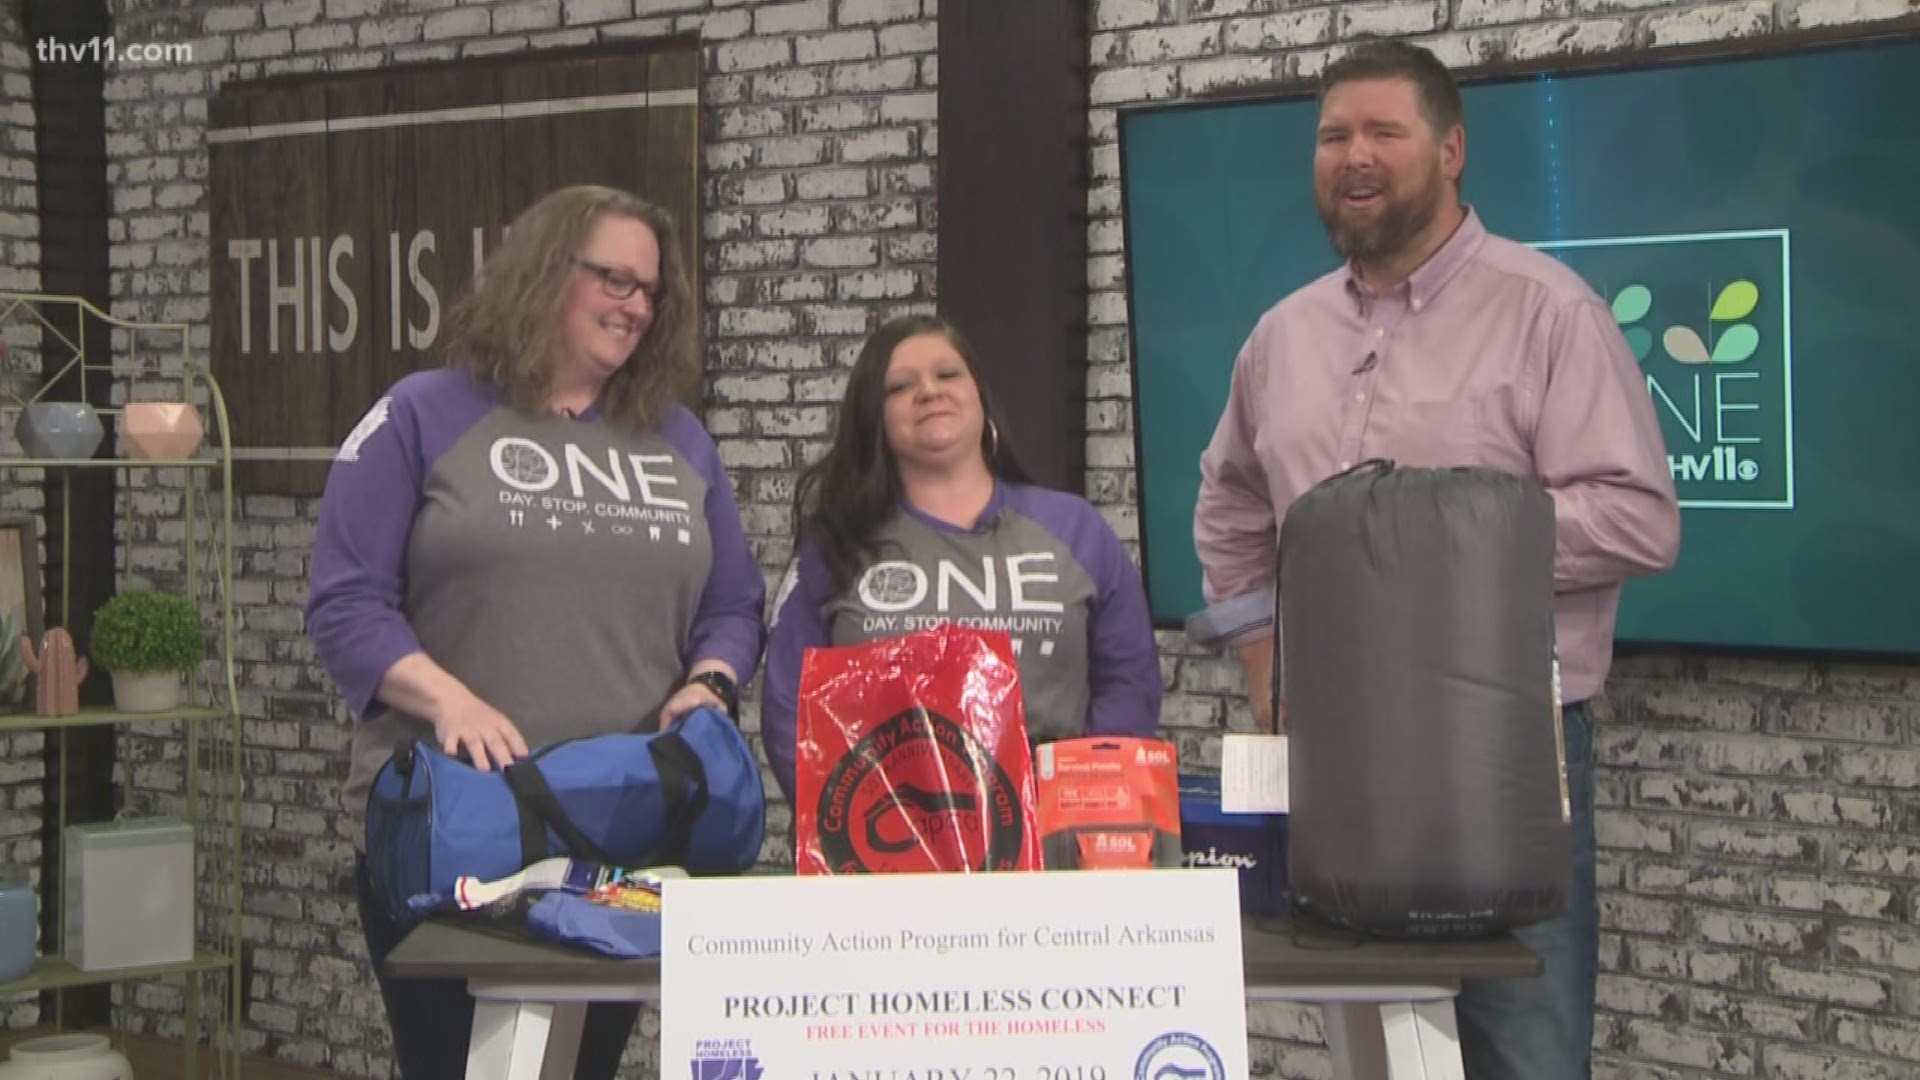 CAPCA has organized a one-day event to help homeless individuals in Faulkner County.